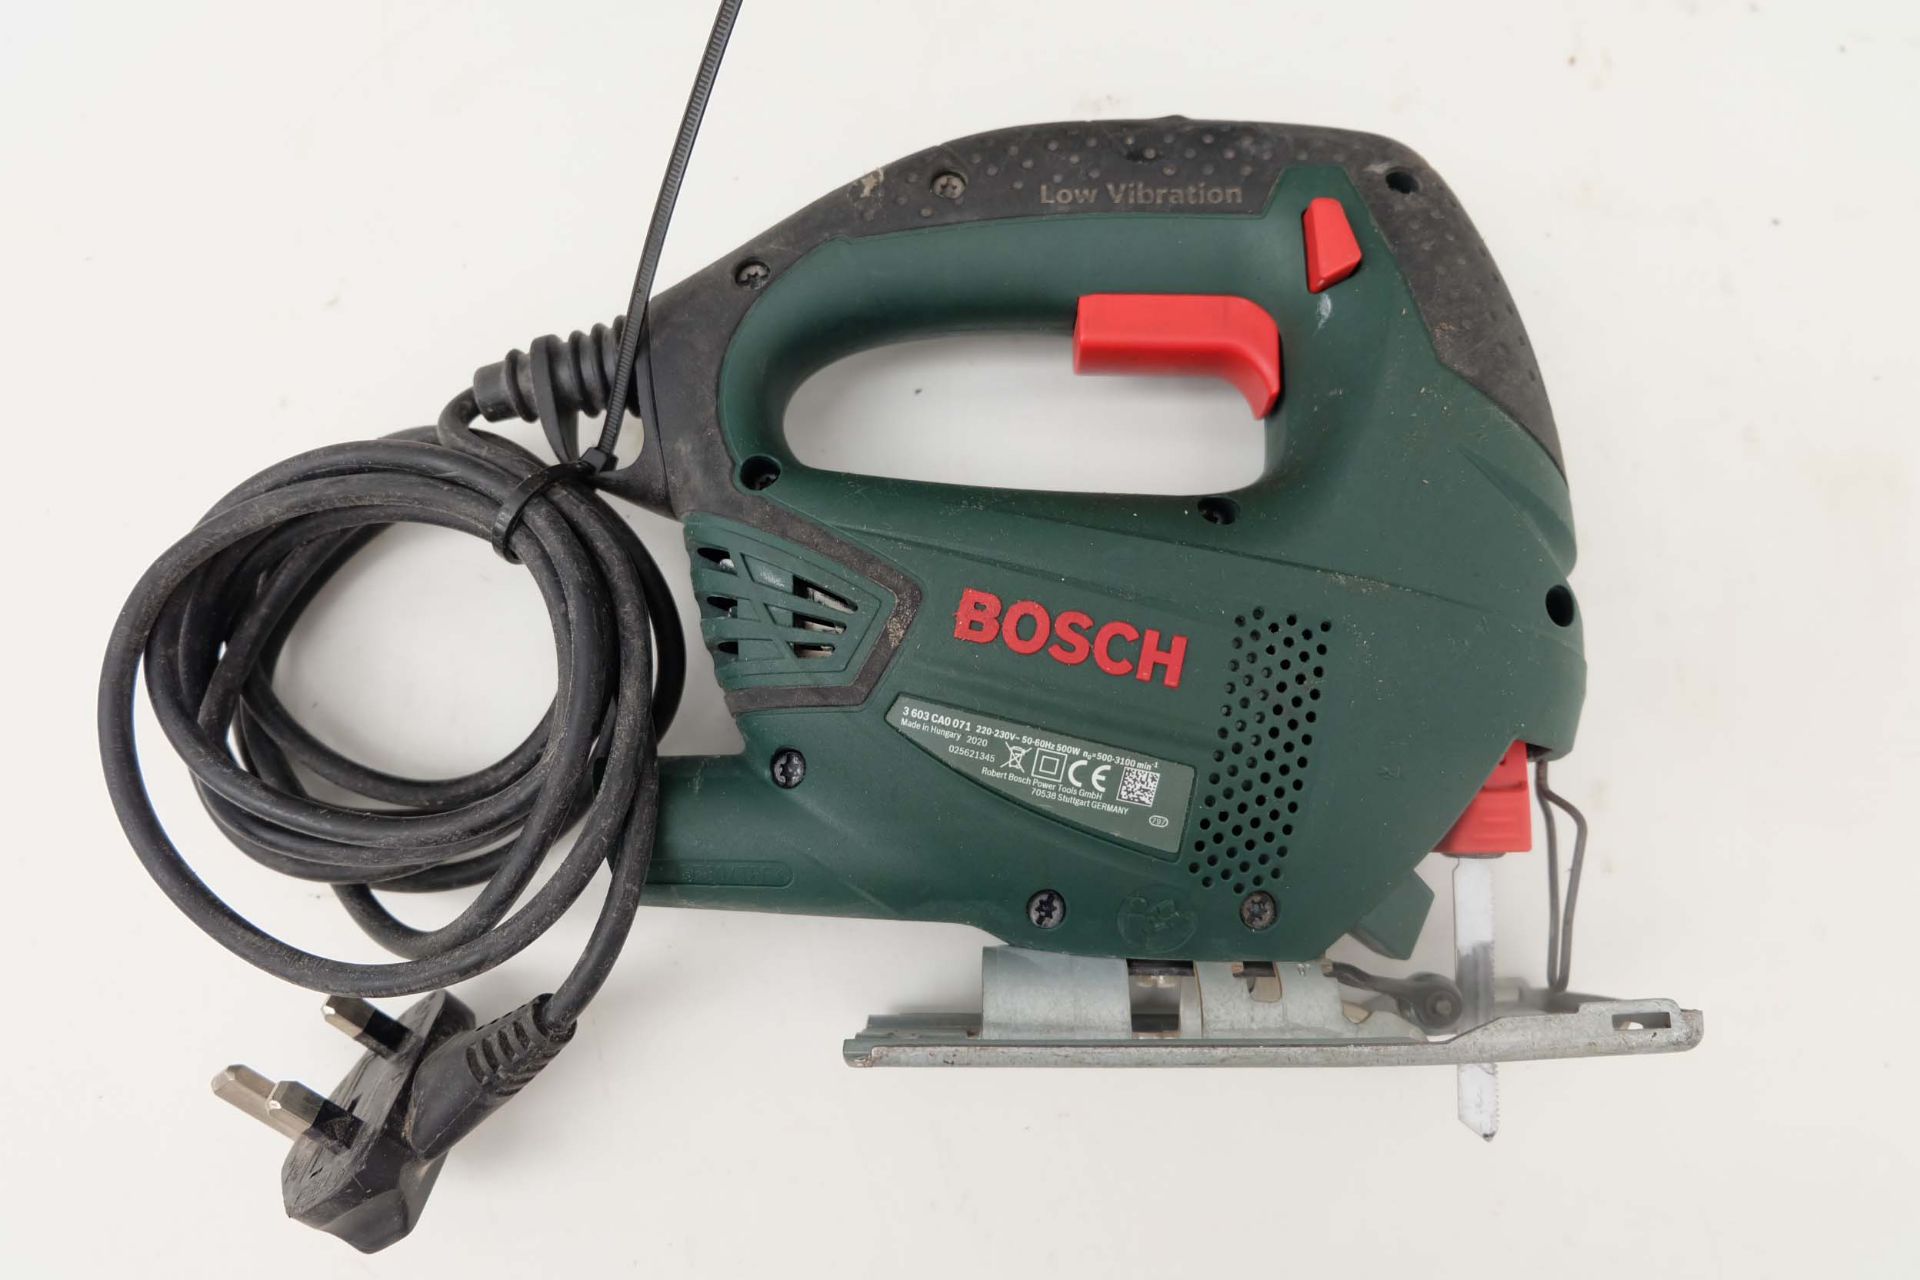 Bosch PST 7200E Jigsaw. Max Cutting Depth 72mm. Single Phase 500W. With Carry Case. - Image 3 of 5